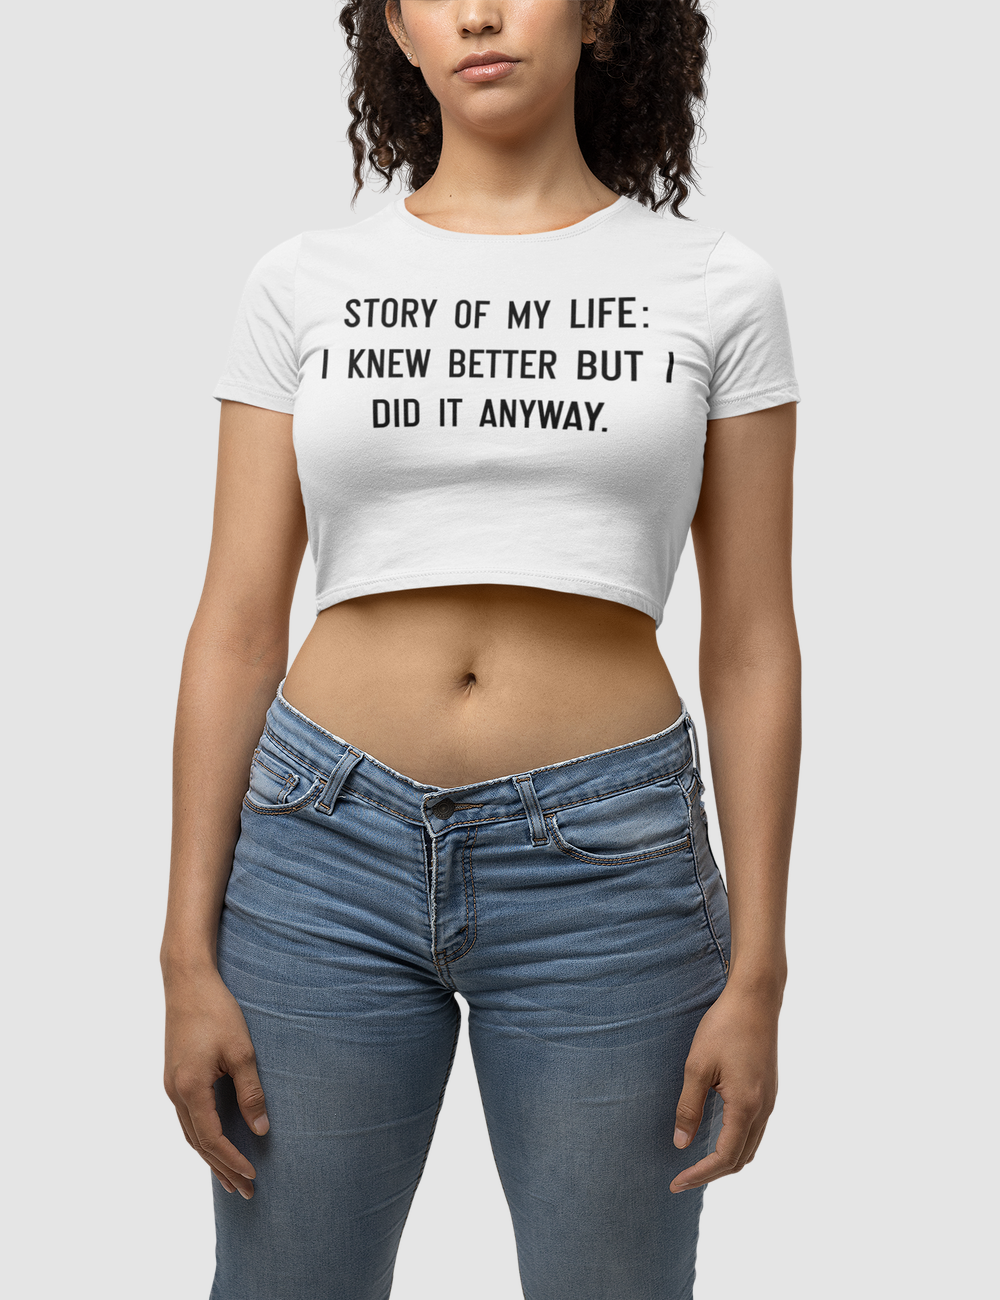 Story Of My Life | Women's Fitted Crop Top T-Shirt OniTakai